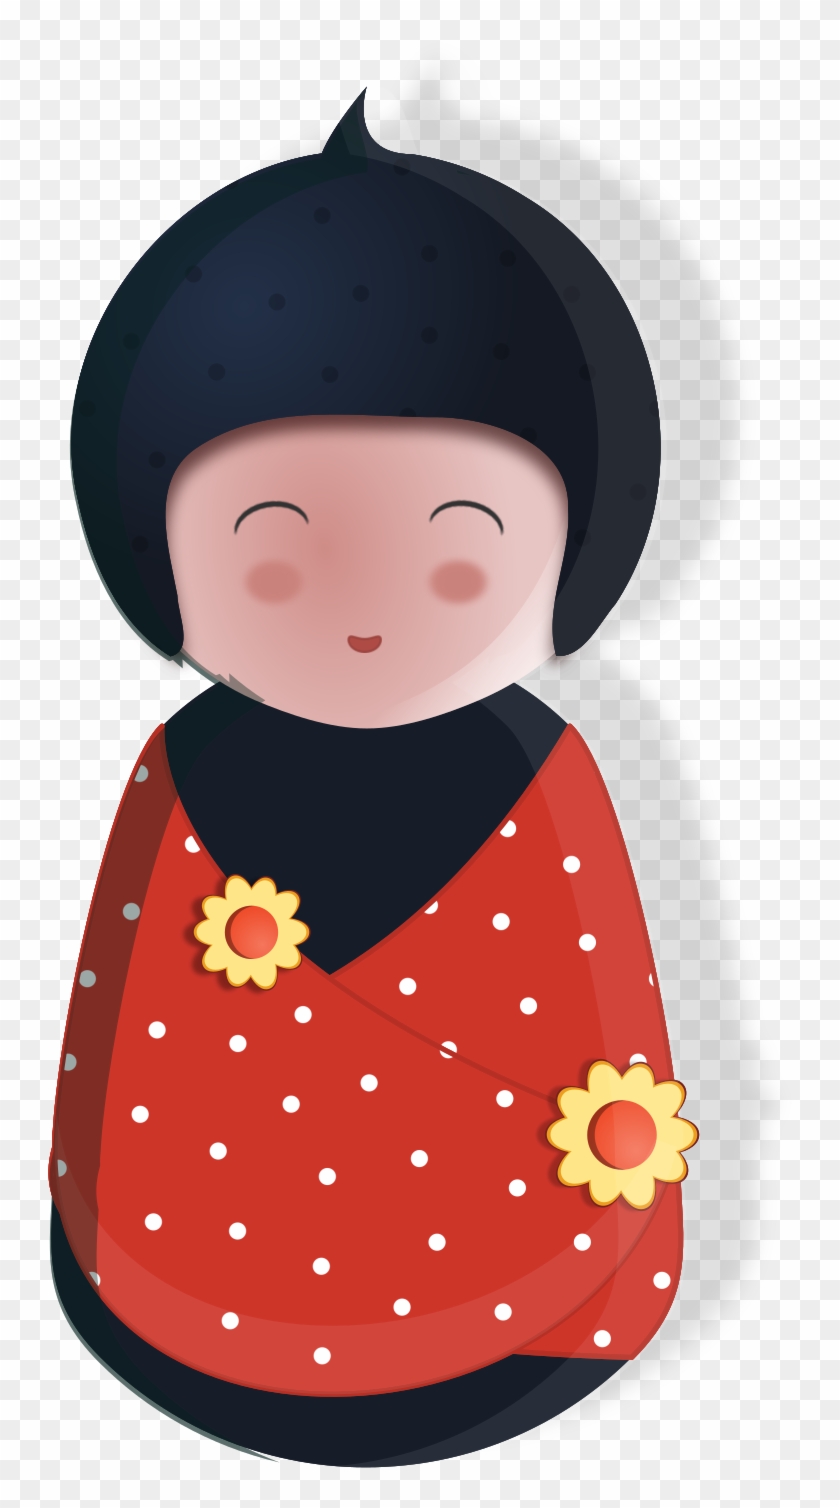 This Free Icons Png Design Of Doll Illustration - Japanese Dolls ...